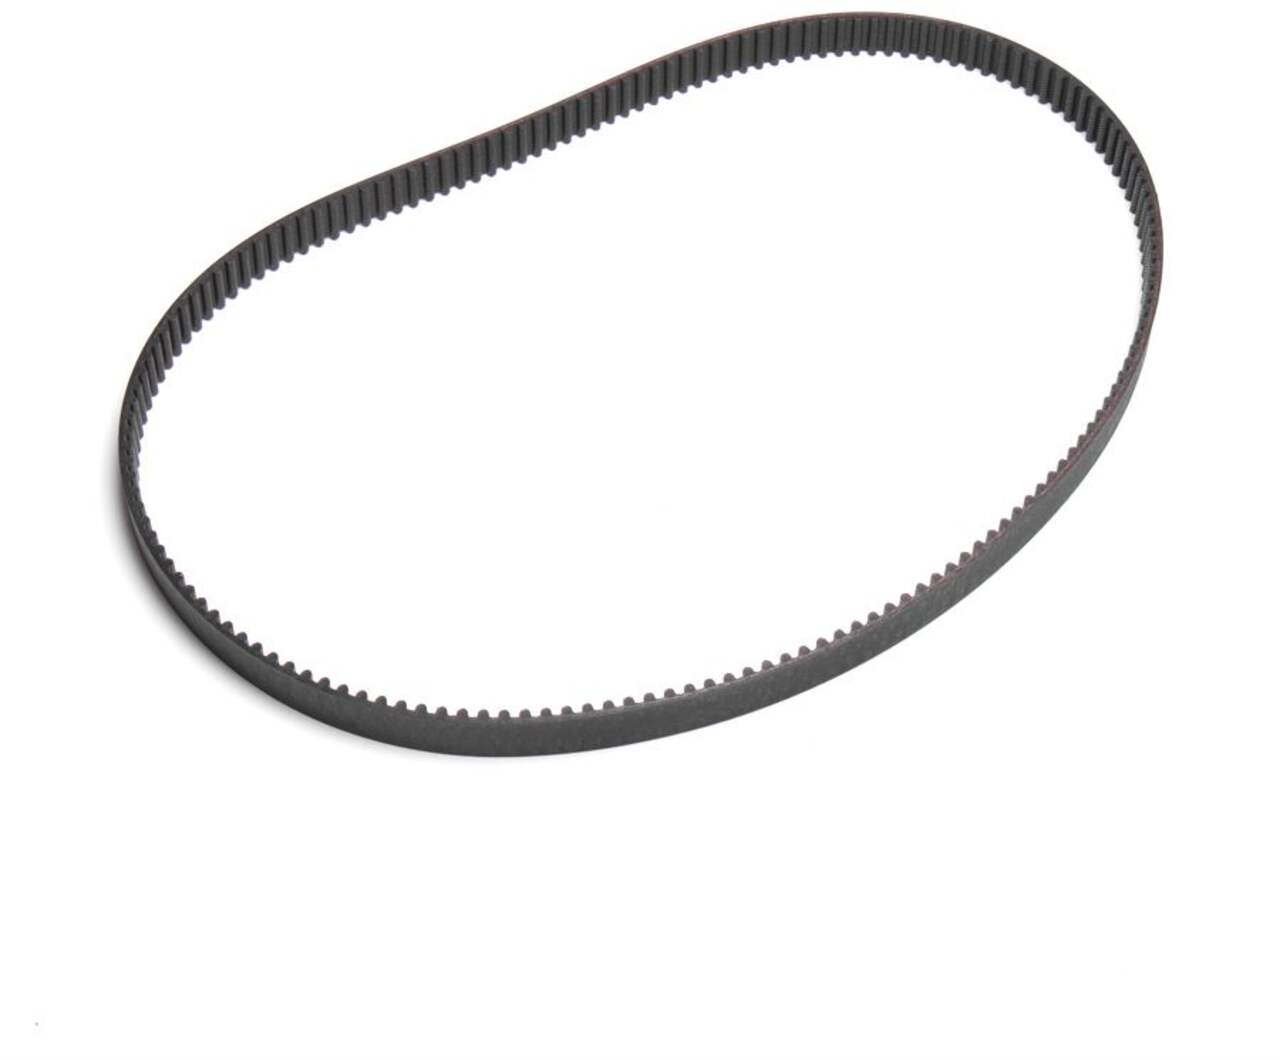 Certified Snowblower Replacement Drive Belt for CT#: 060-3732 & 060-3740